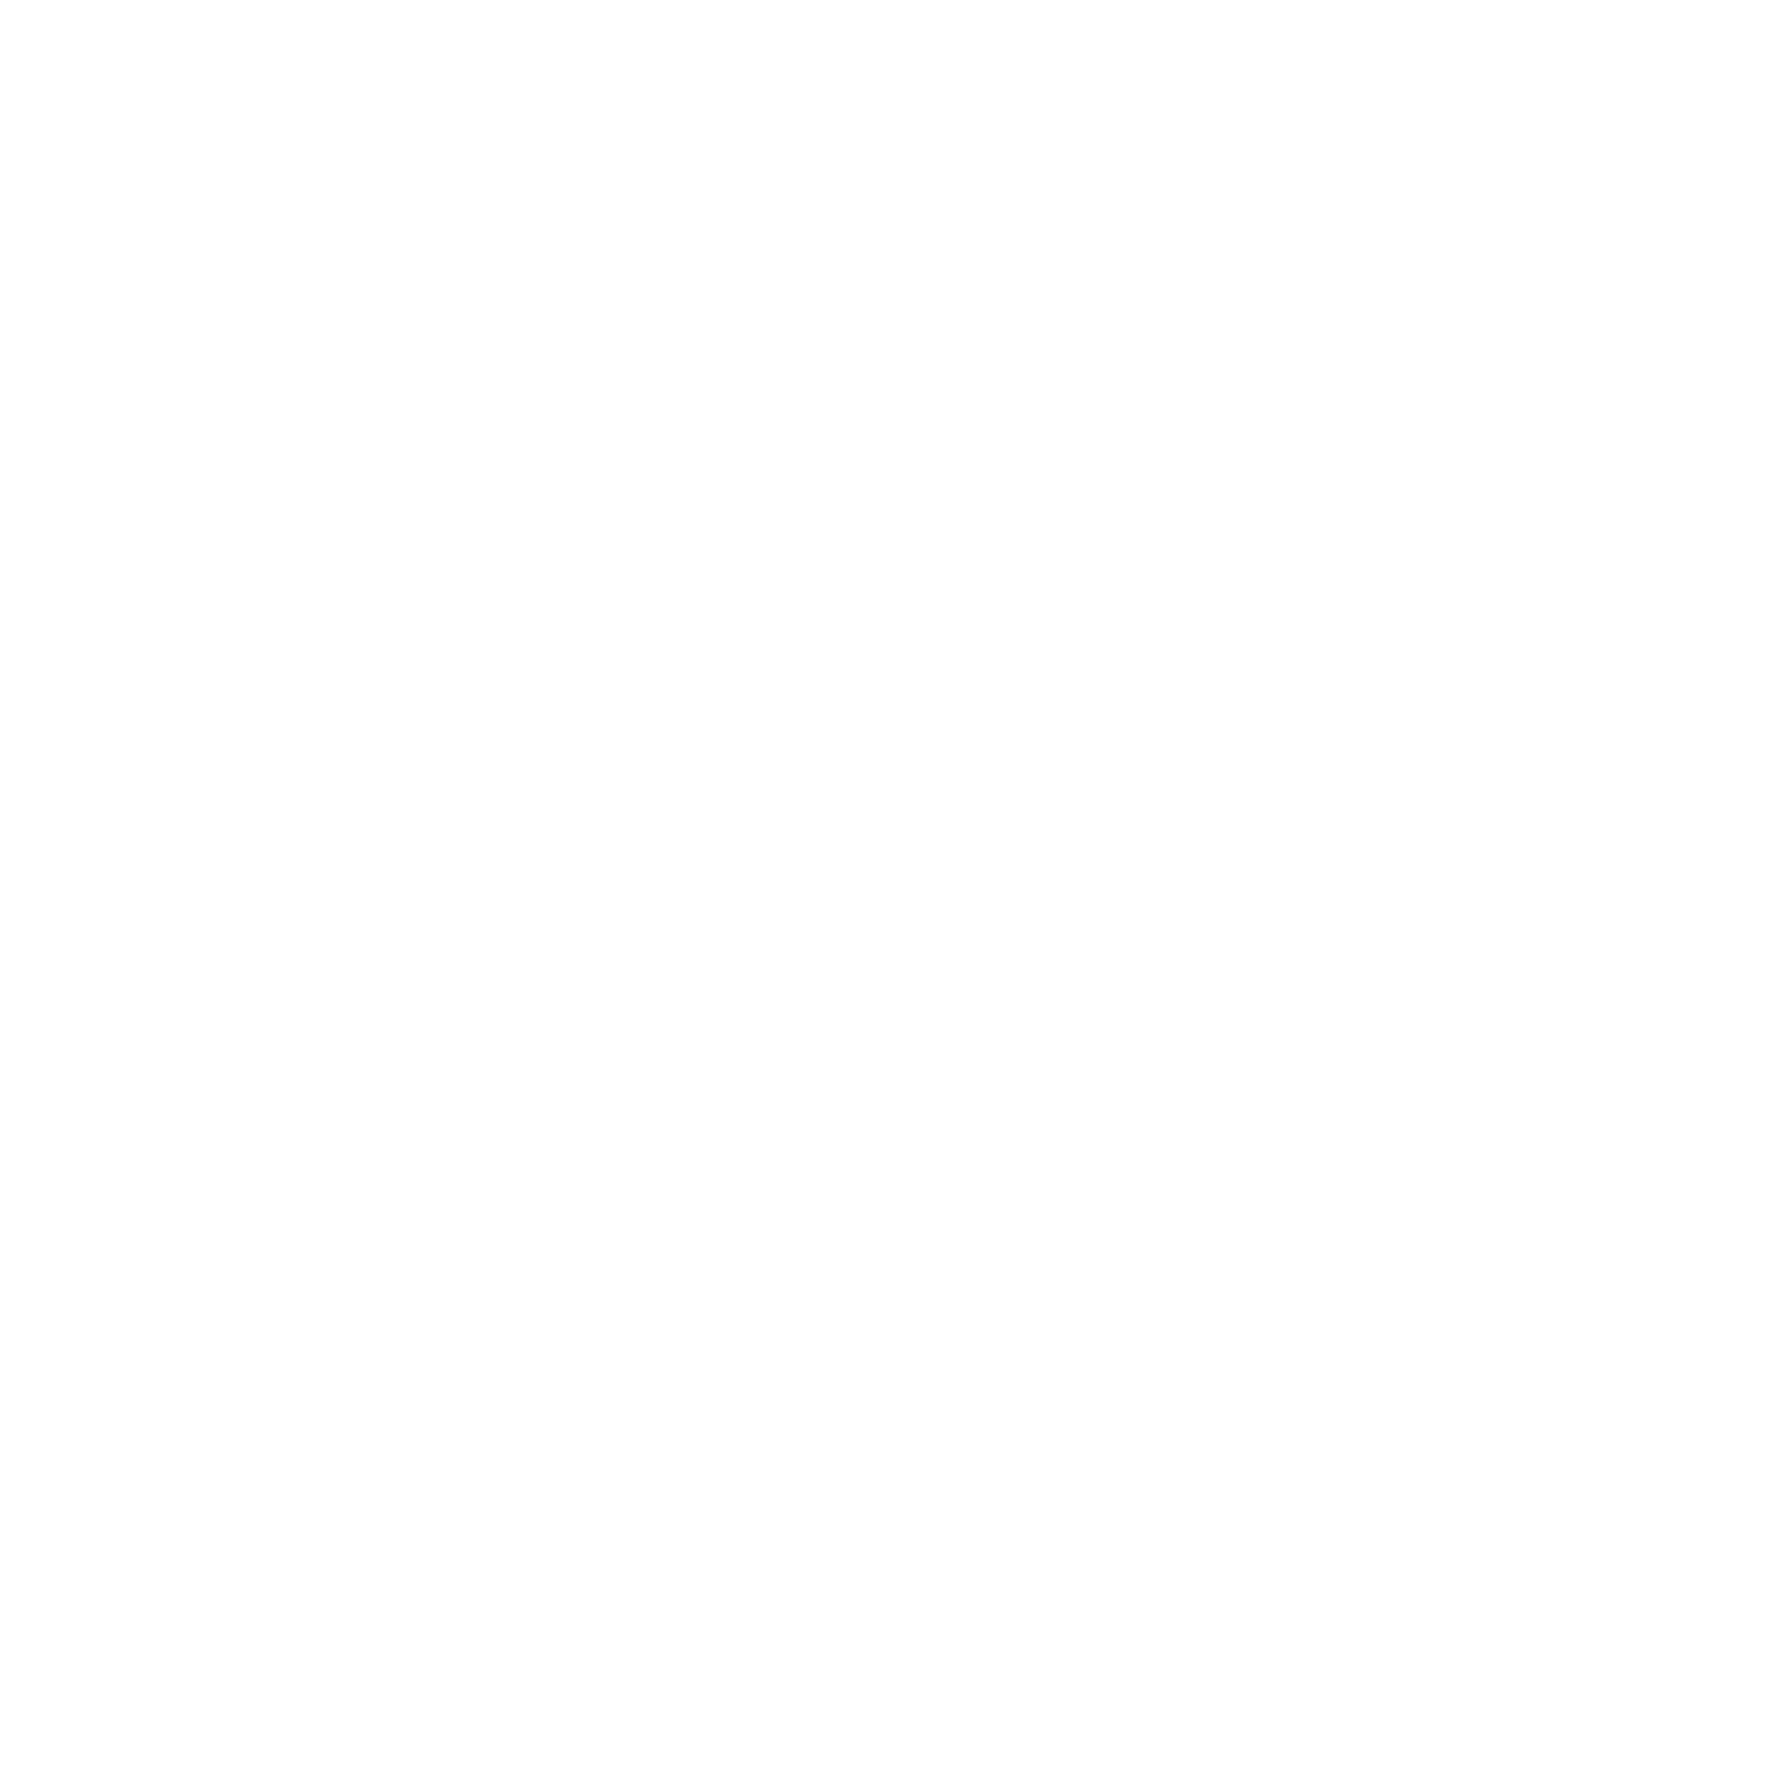 Cre8ion